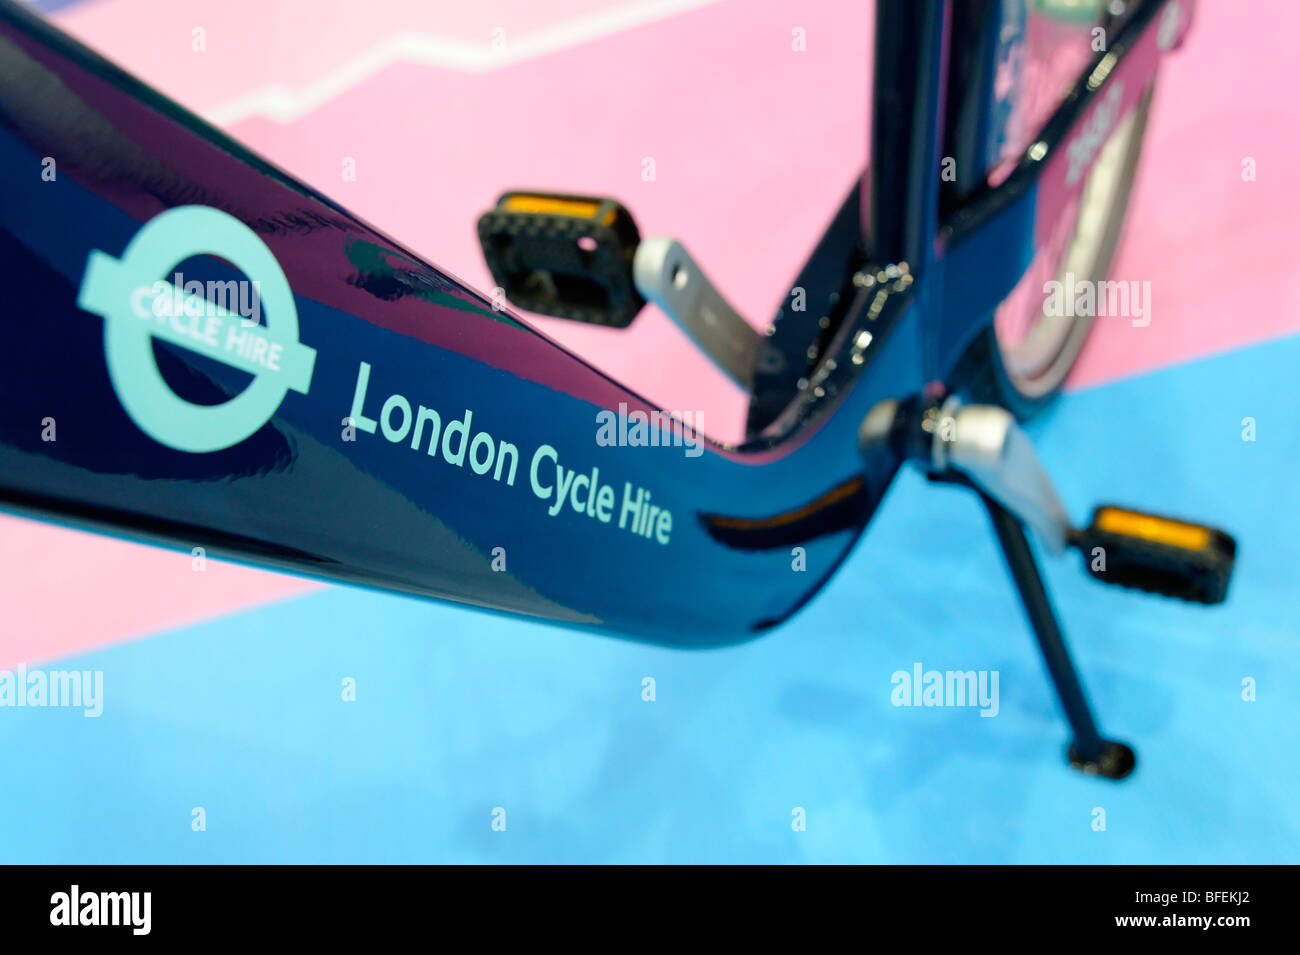 TFL Cycle Hire bike, public bicycle sharing scheme which will launch in London 2010. Cycle Show. London 2009. Stock Photo